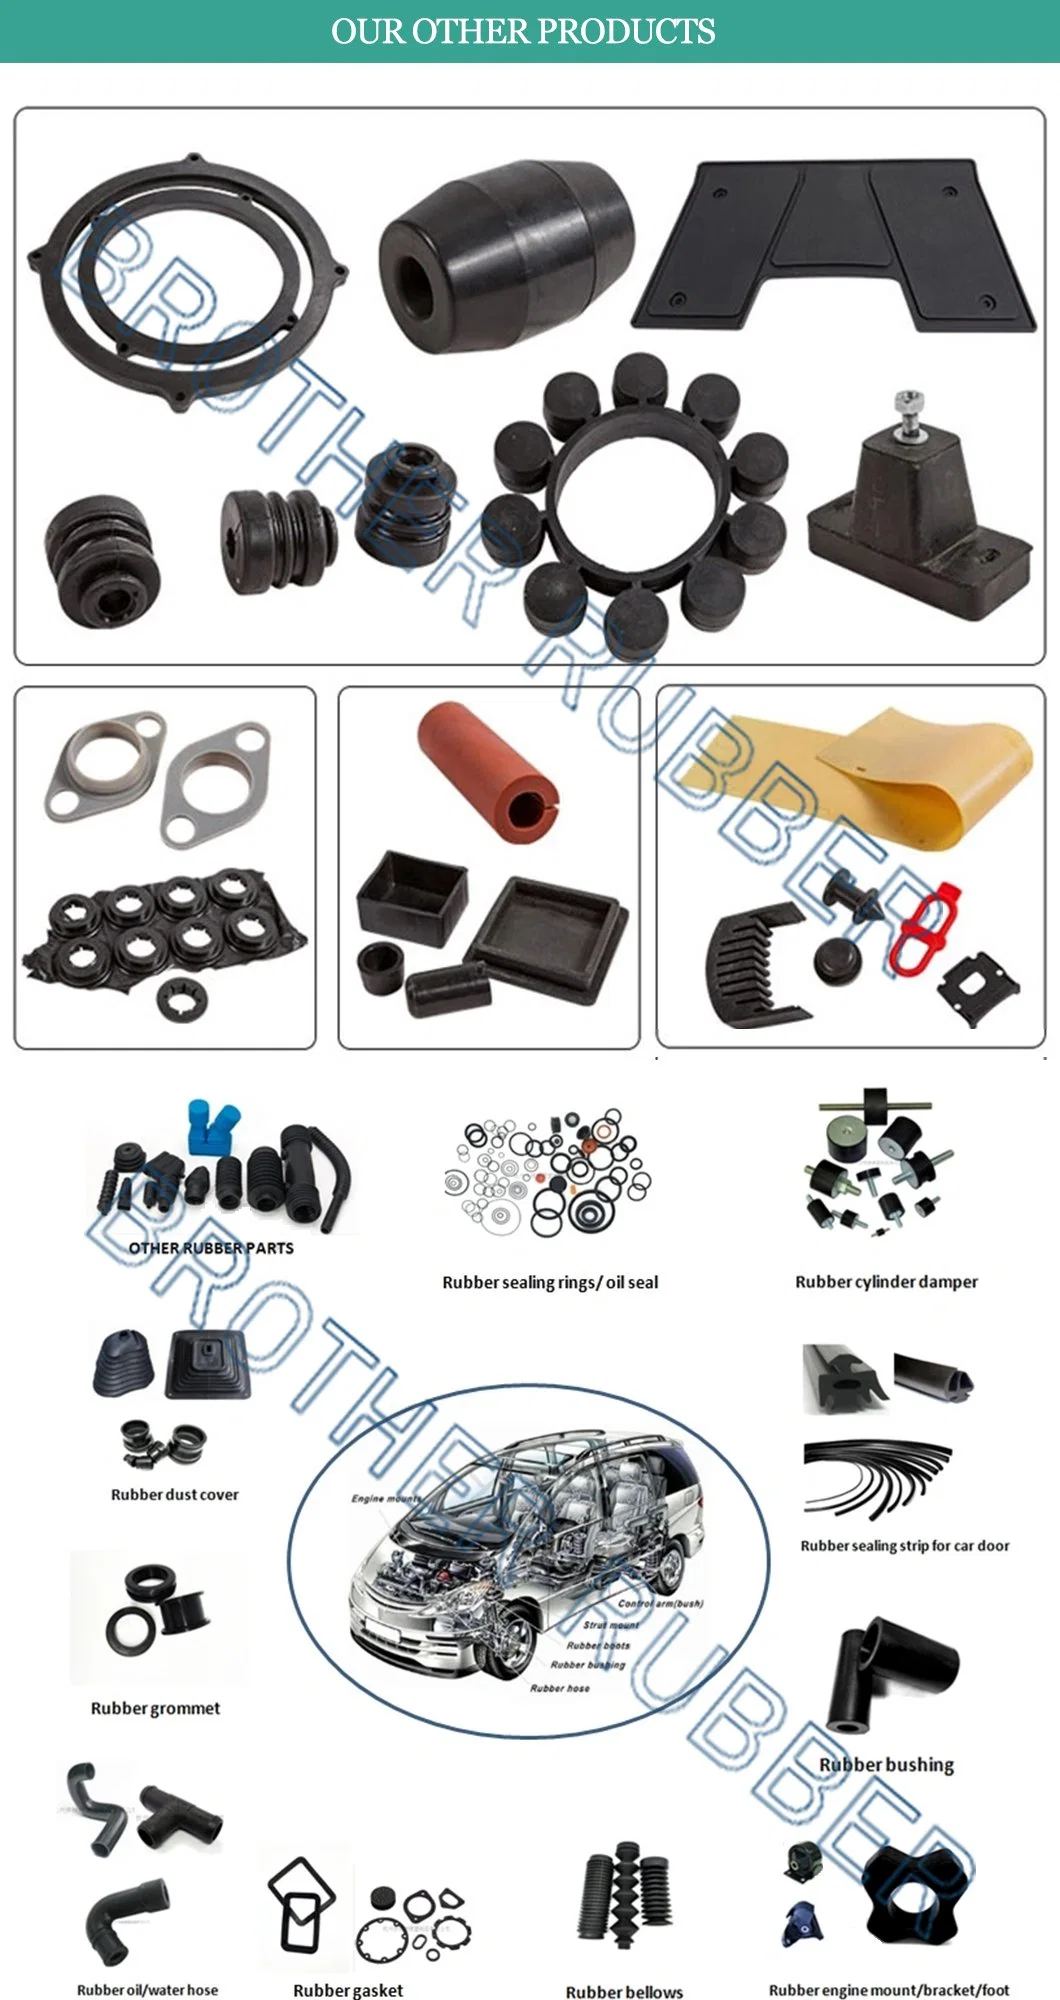 Metal Bonded Rubber Resilient Mounting / Vibration Isolation Threaded Rubber Mount / Pad Pressure Machine Rubber Mount